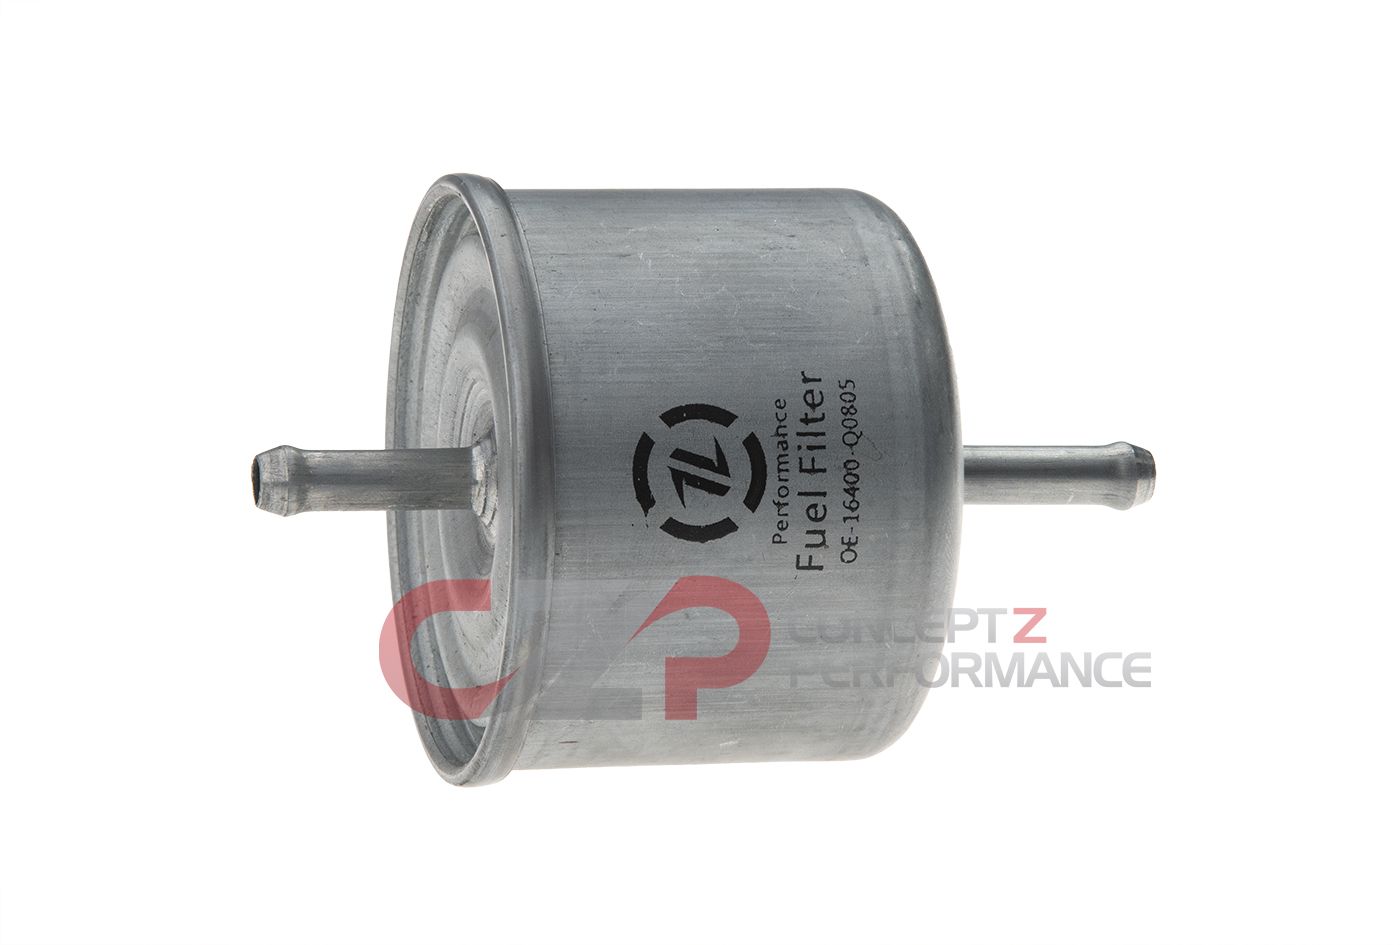 ISR Performance OE Replacement Fuel Filter - Nissan 300ZX Z32 / 240SX SR20DET S13 S14 S15